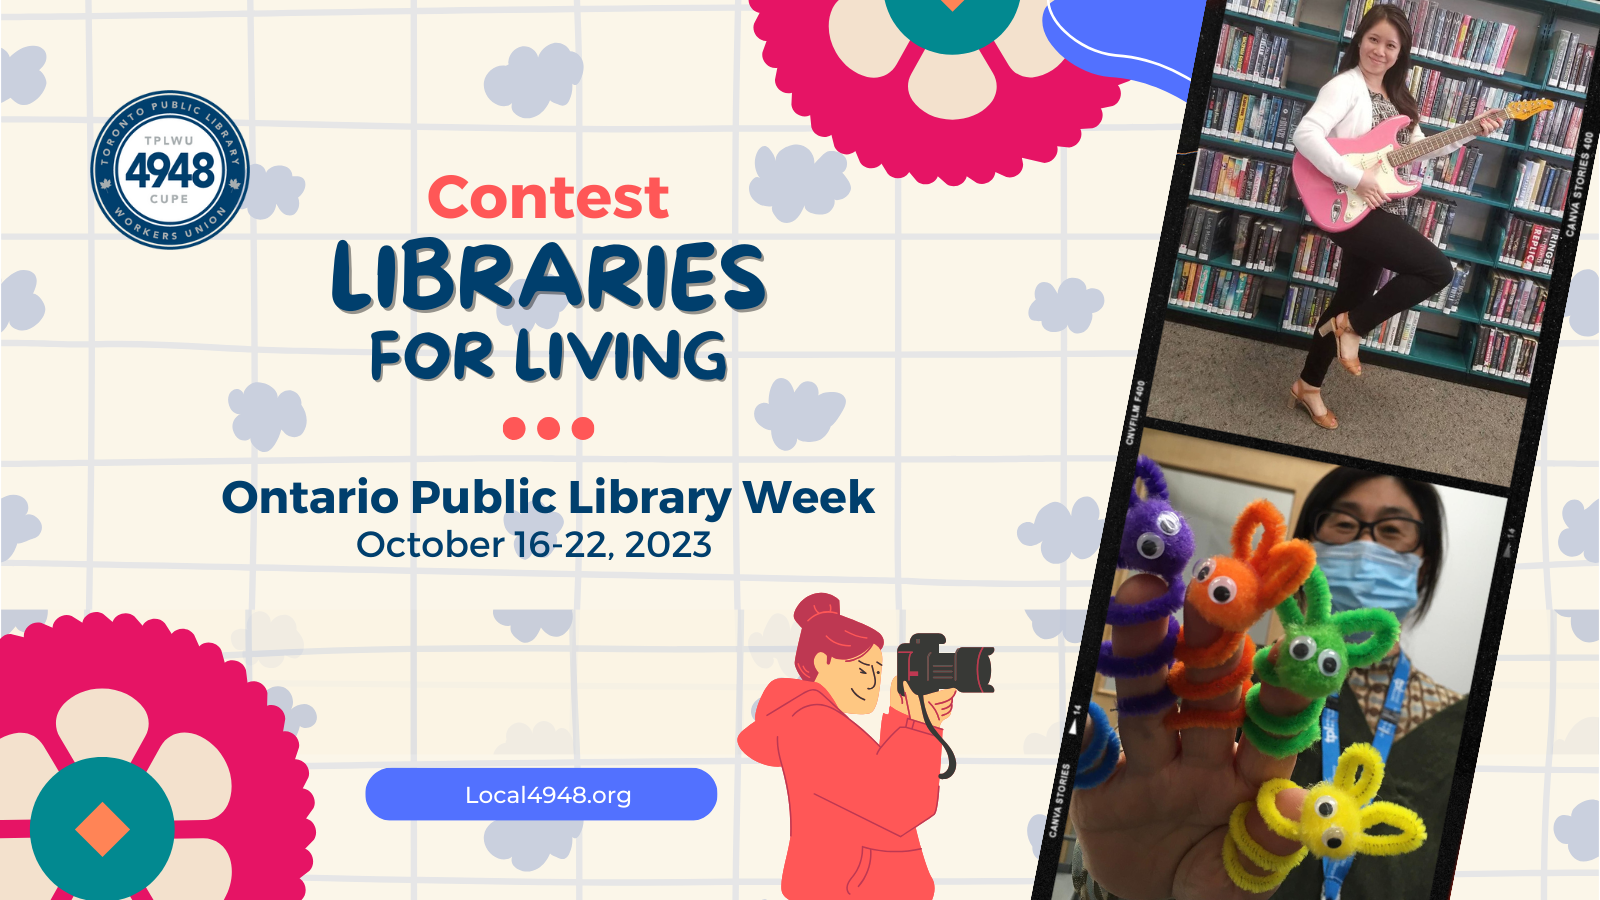 "Contest. Libraries for a Living. Ontario Public Library Week. October 16 to 22.